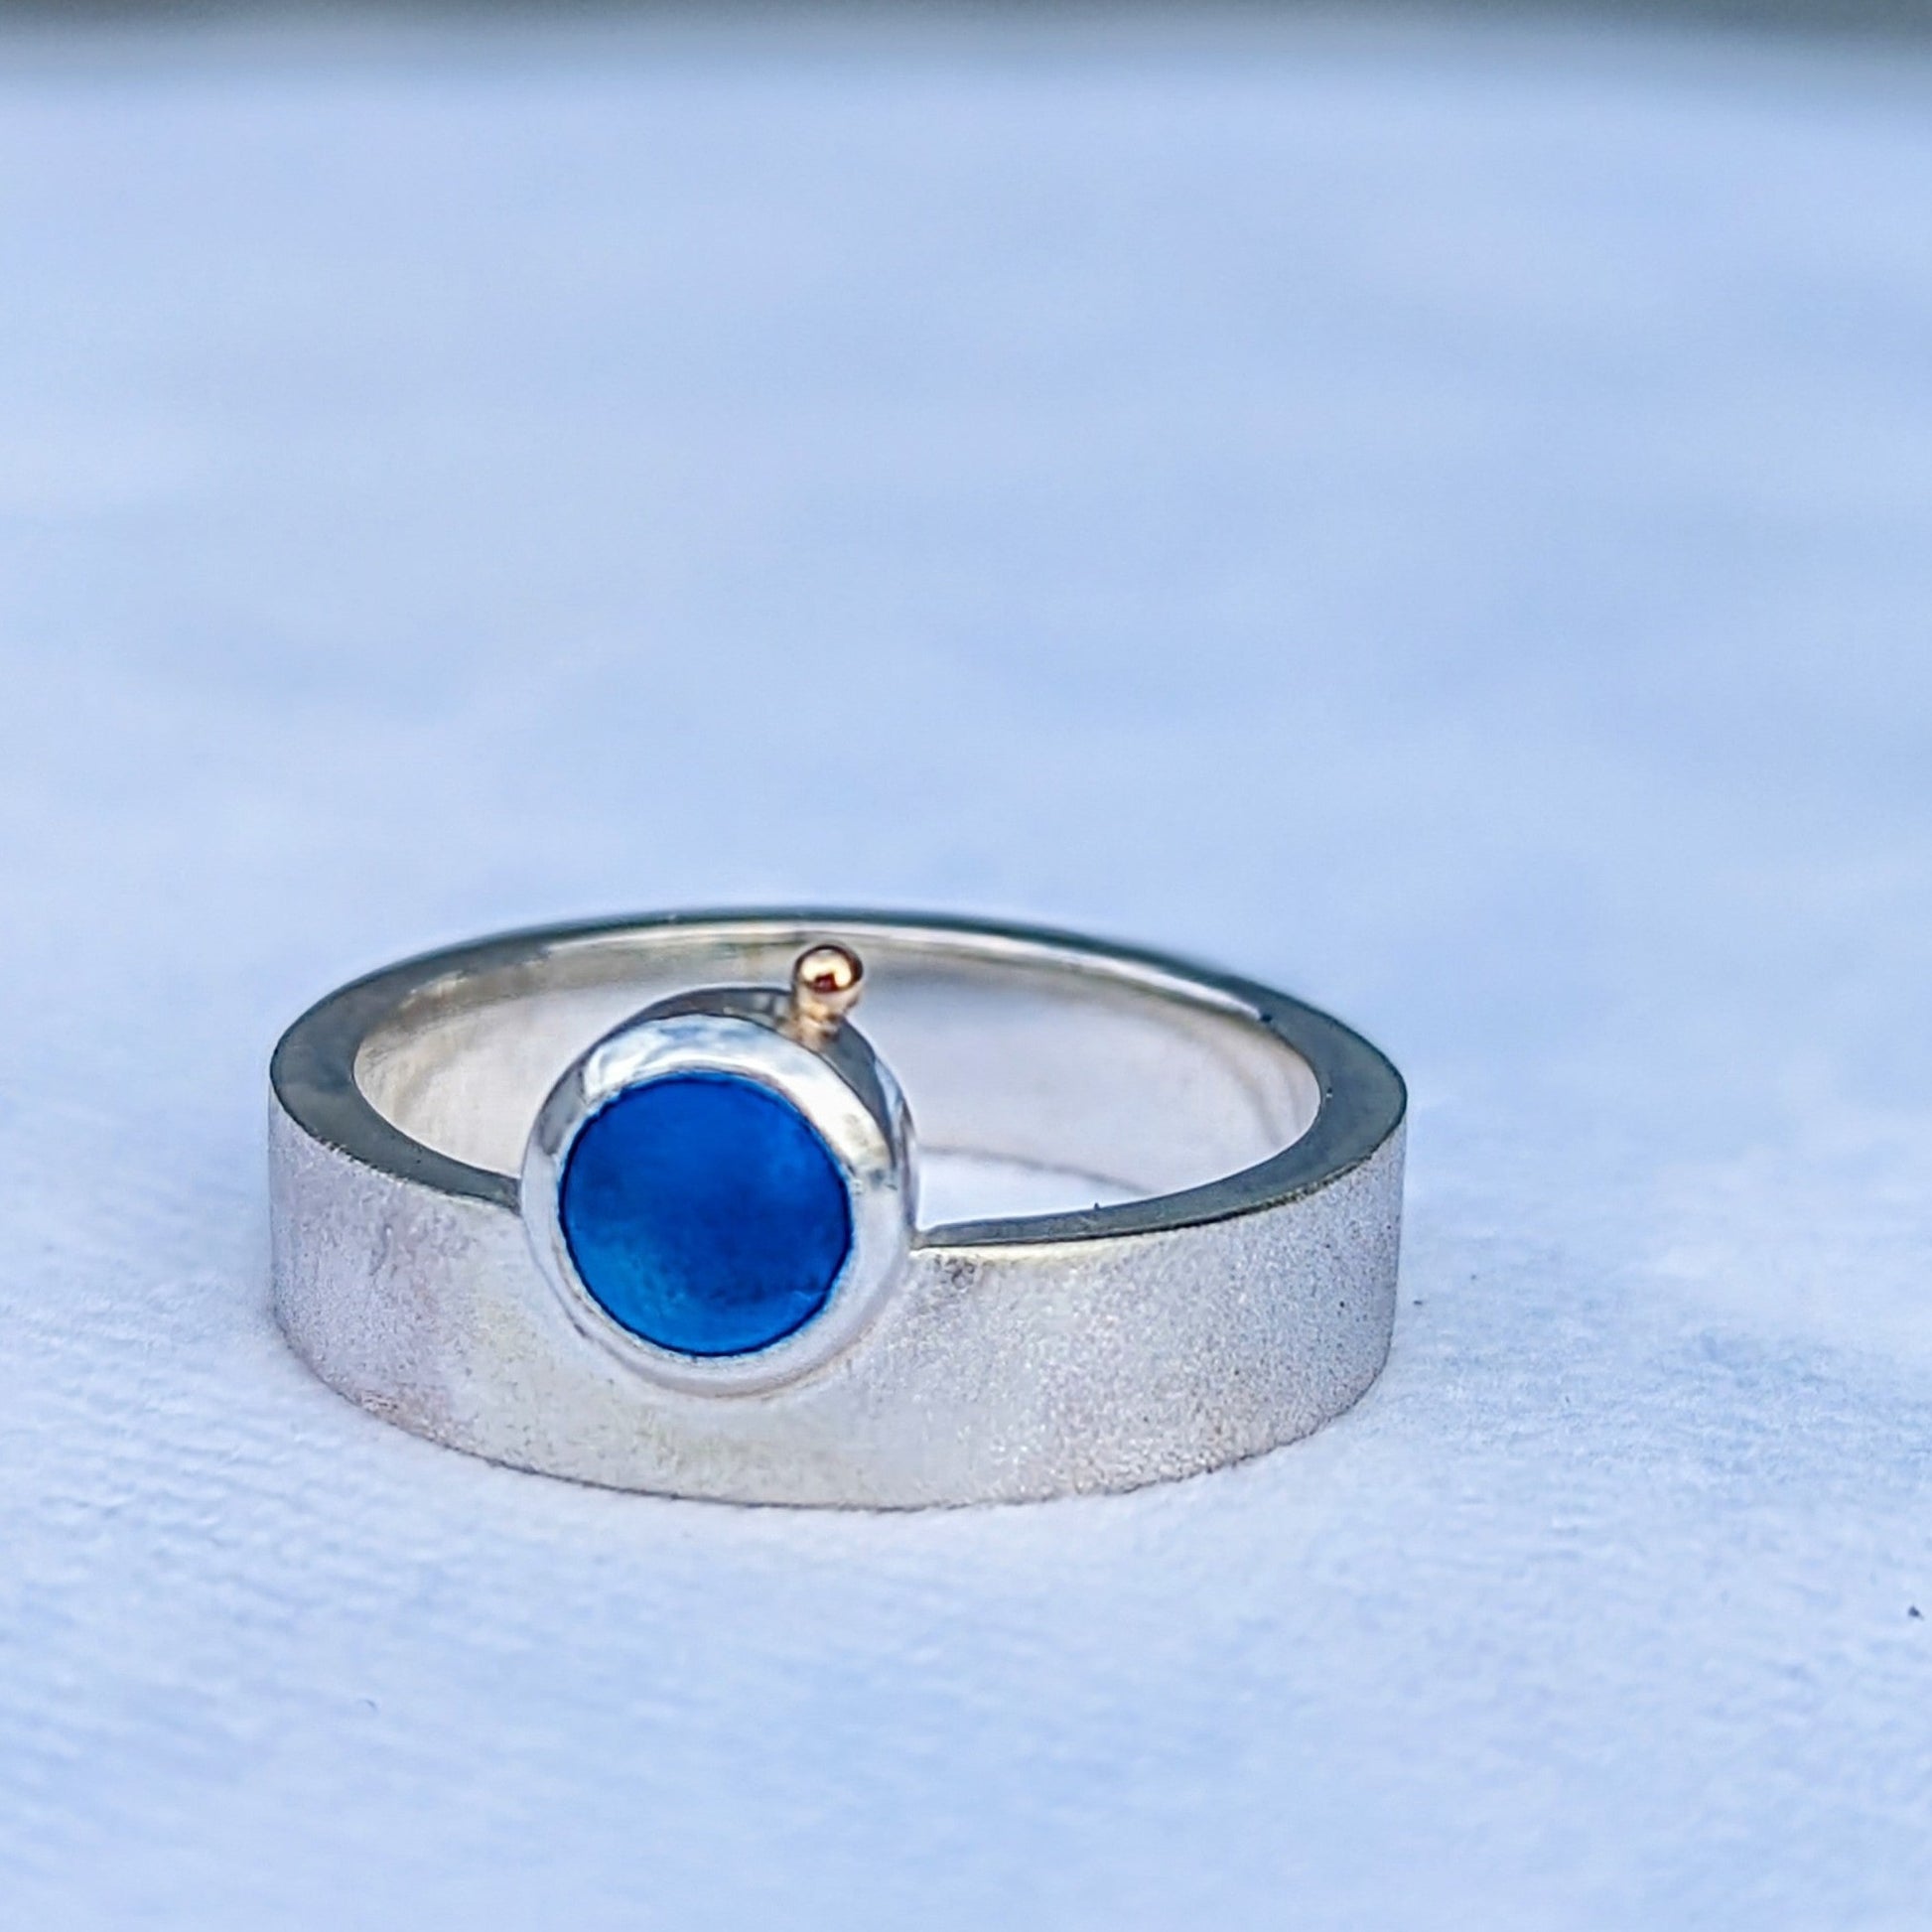 Solid silver chunky unisex ring with blue sea glass and satin finish